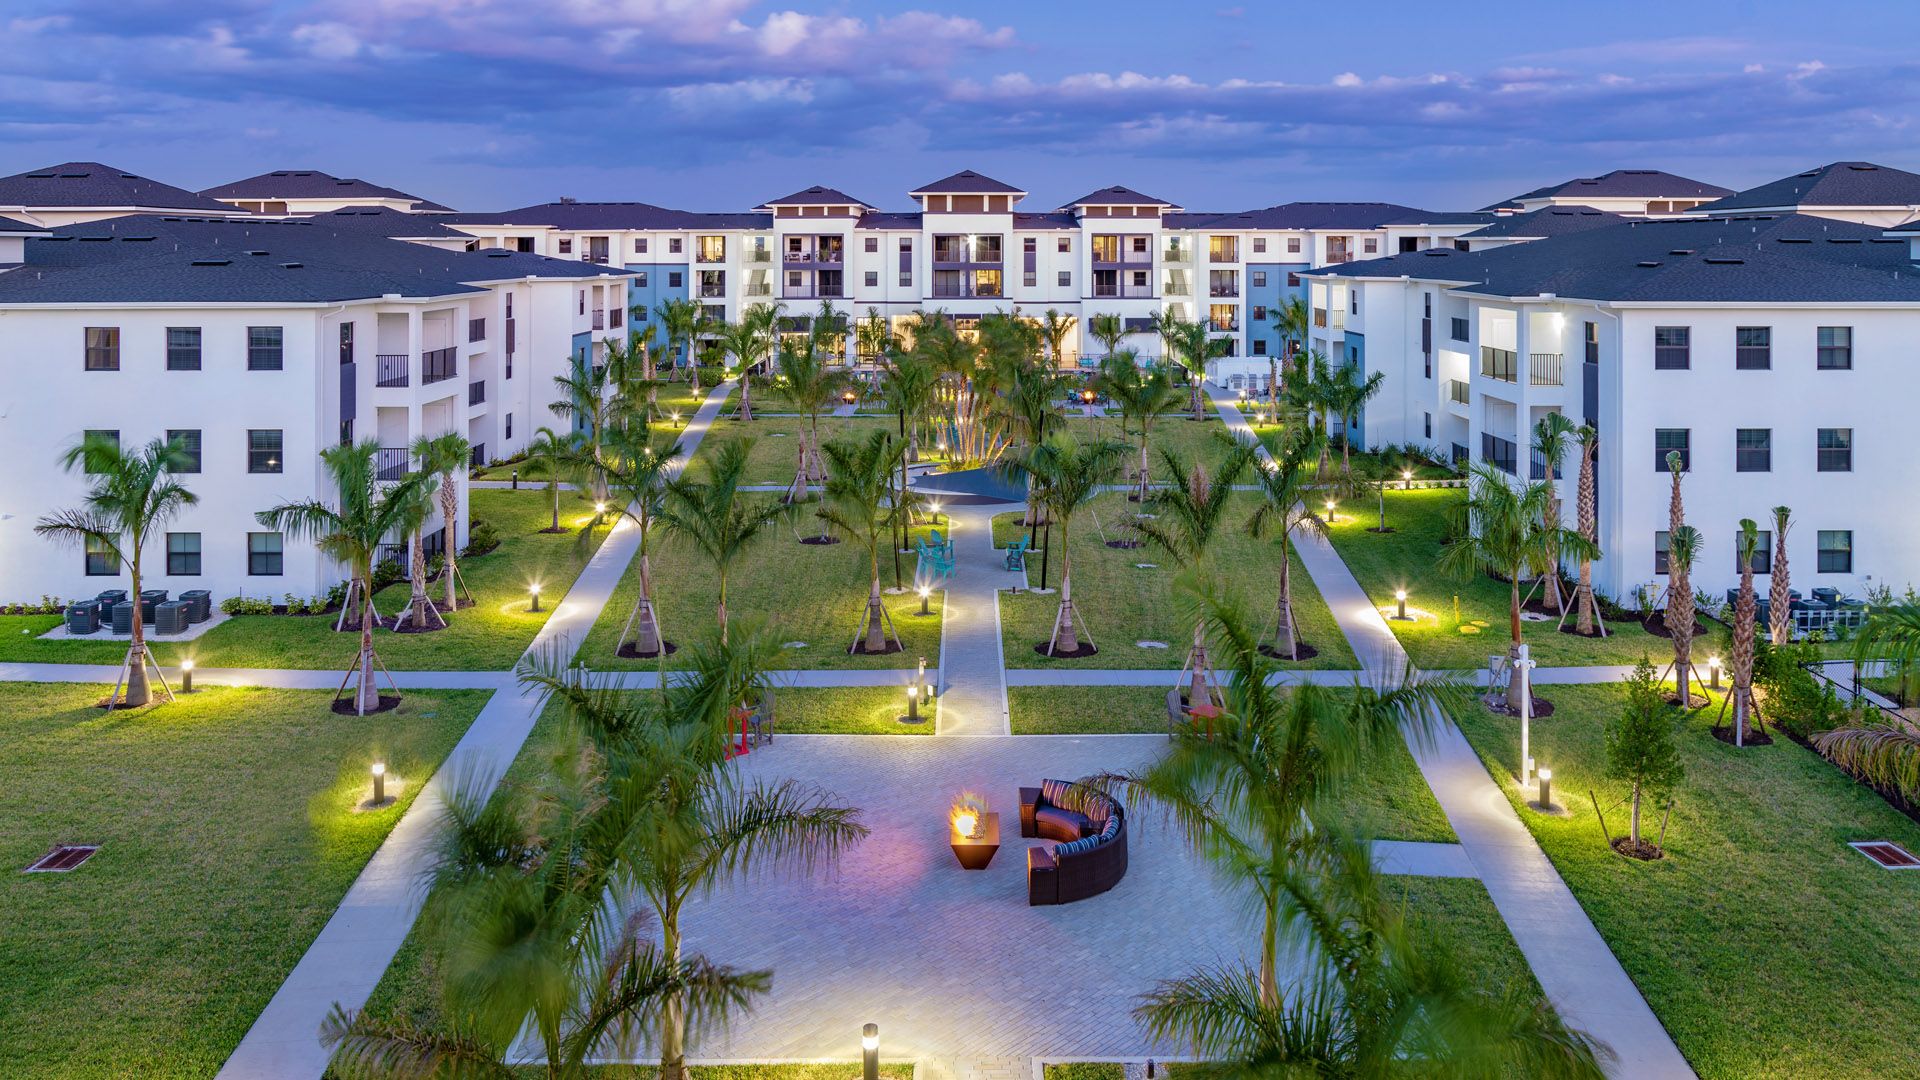 Hawthorne Further Expands Florida Portfolio with Grand Central Apartments